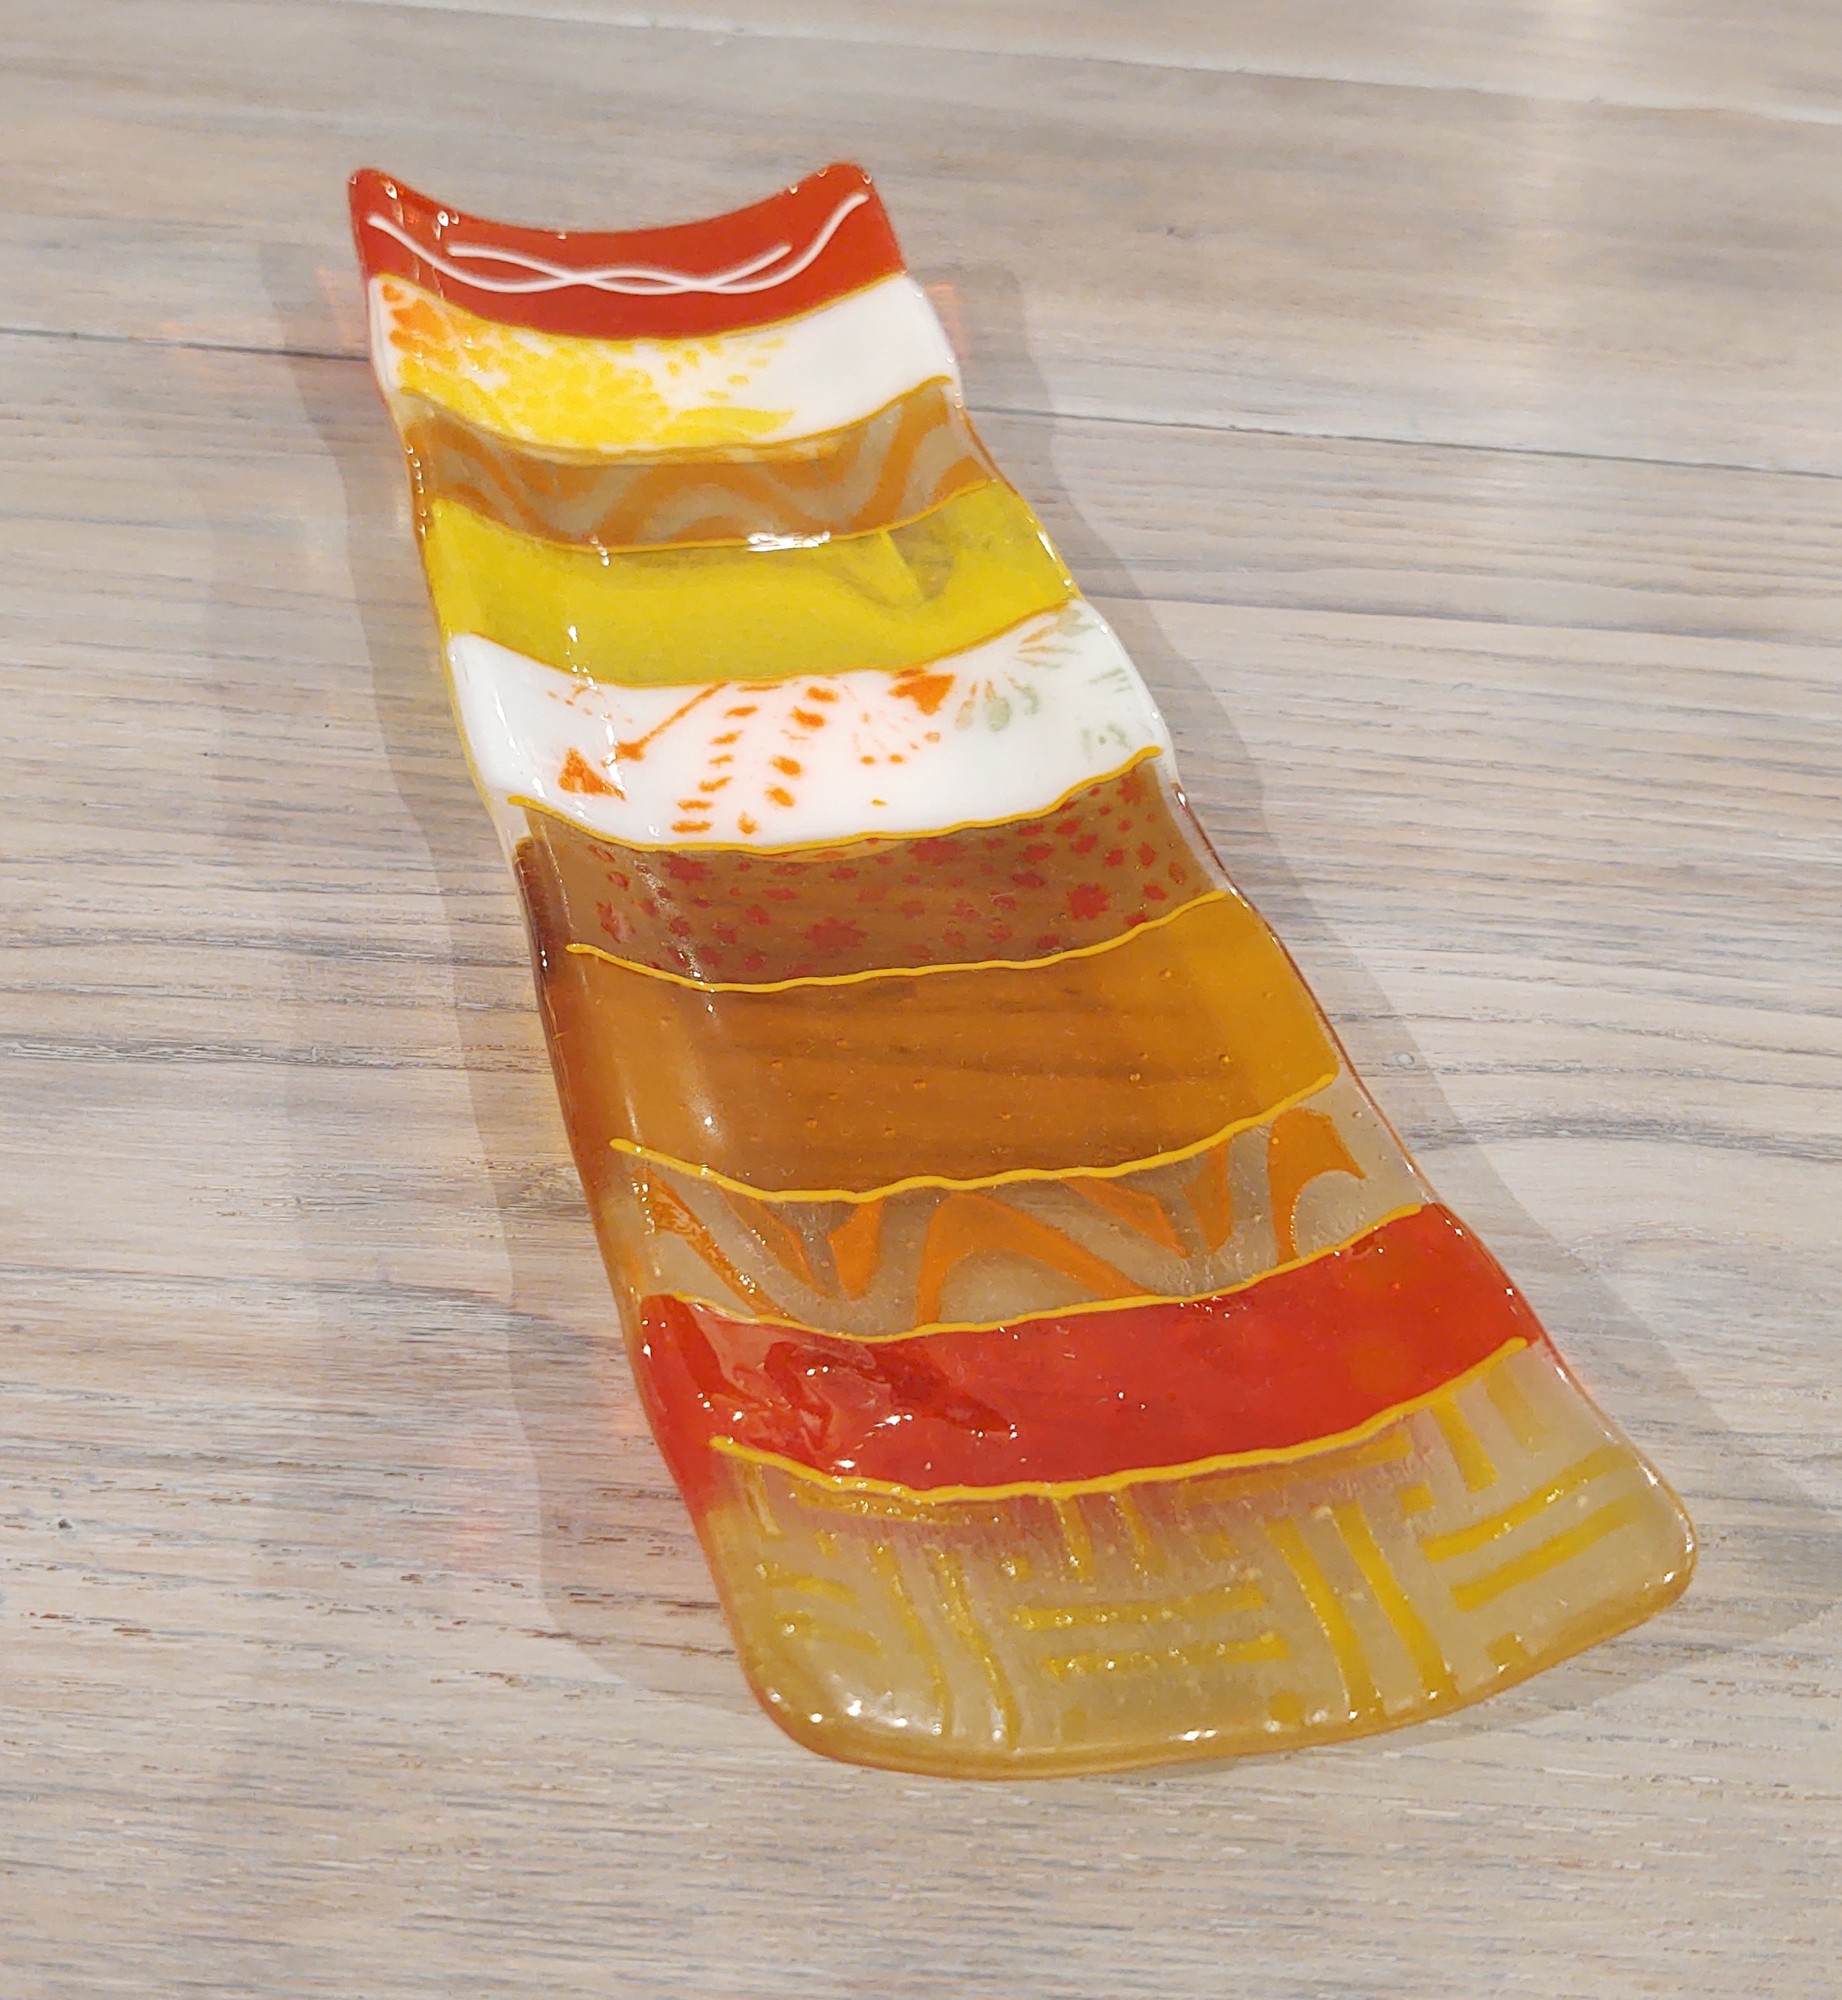 Fused Glass Art Designs
Channel Plate with Fall Colors
4x13 inches